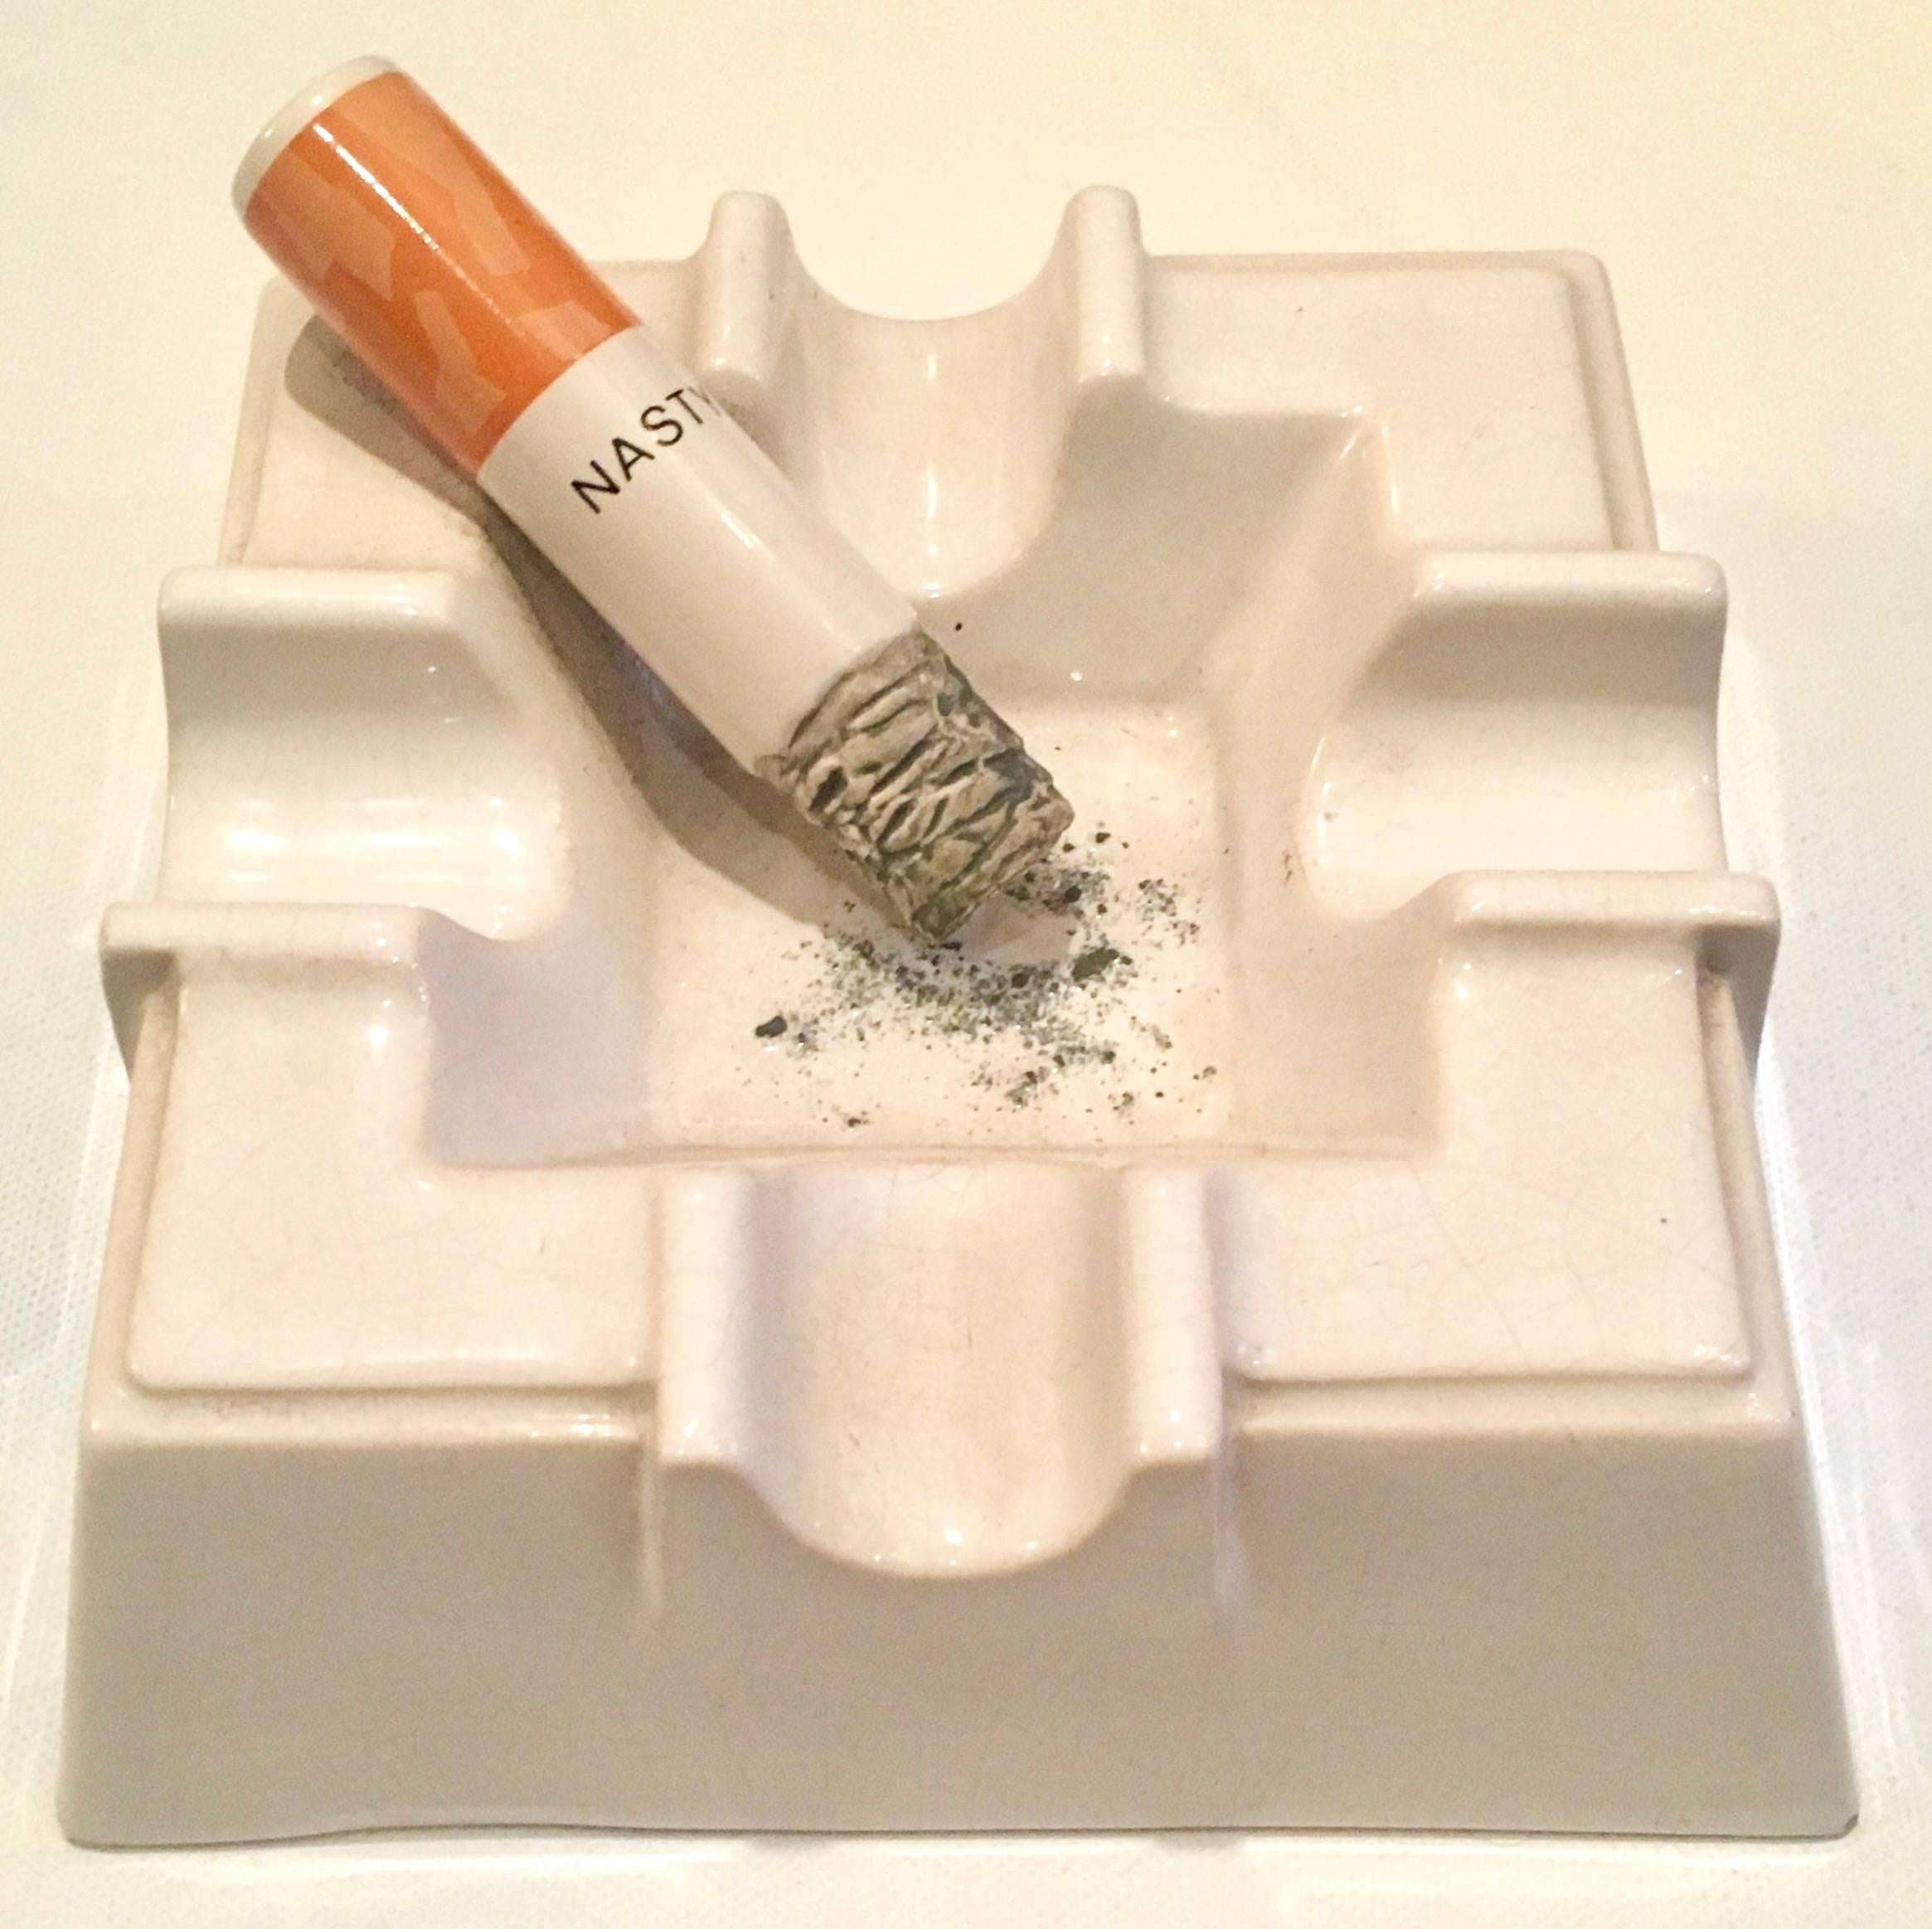 Sculptural ceramic ashtray from England can be used as an ashtray but we prefer to think of this as a play on the pitfalls of smoking! Time to Light up your favorite 420 Marijuana Cigarette! 

The cigarette and ashes are part of the design and